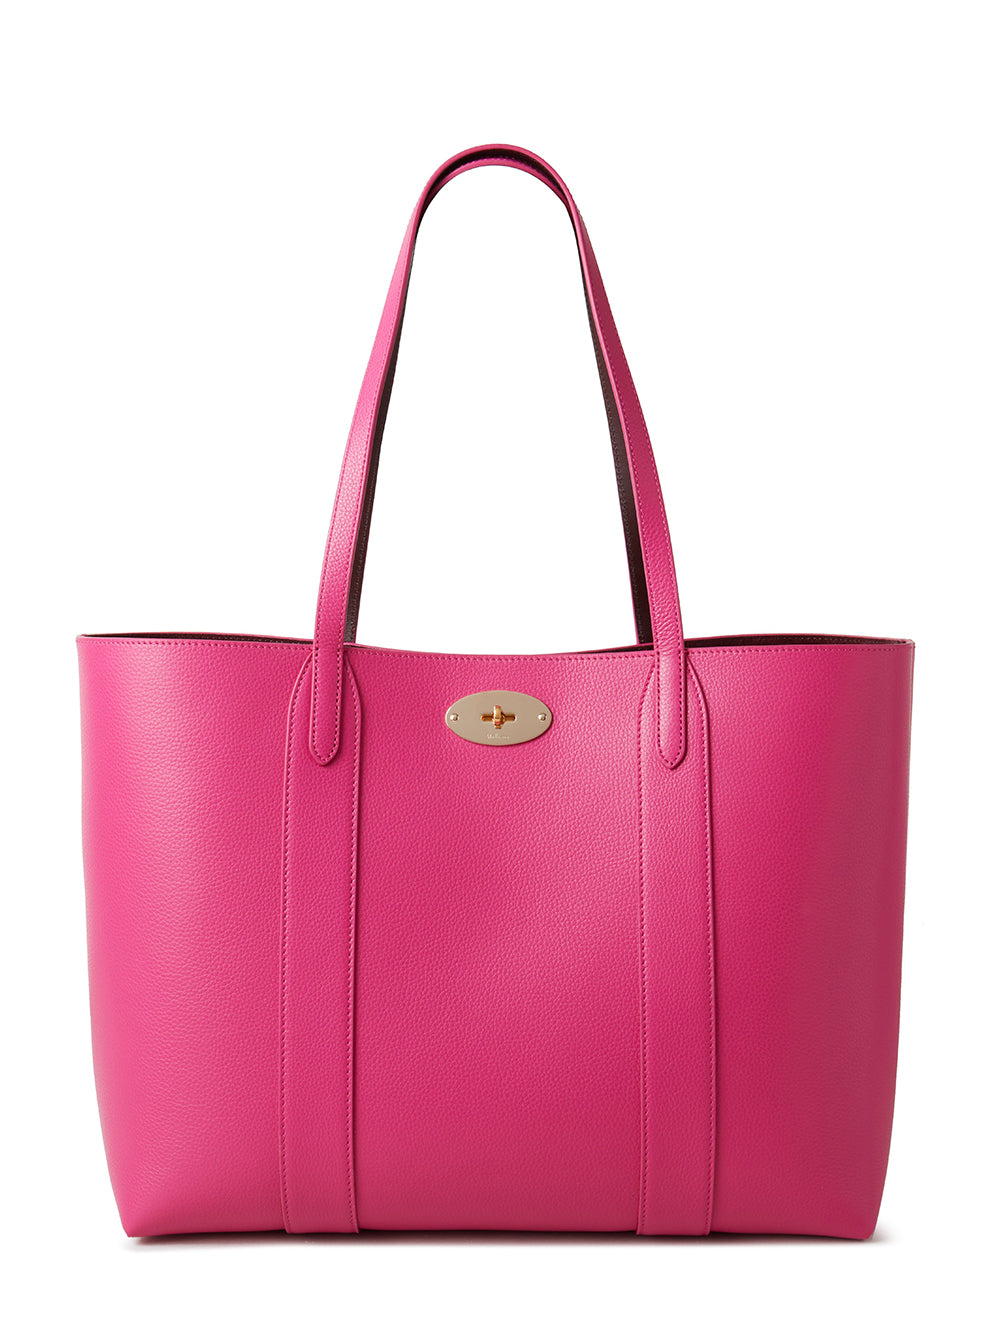 MULBERRY-Bayswater-Tote-Mulberry-Pink-Small-Classic-Grain-1